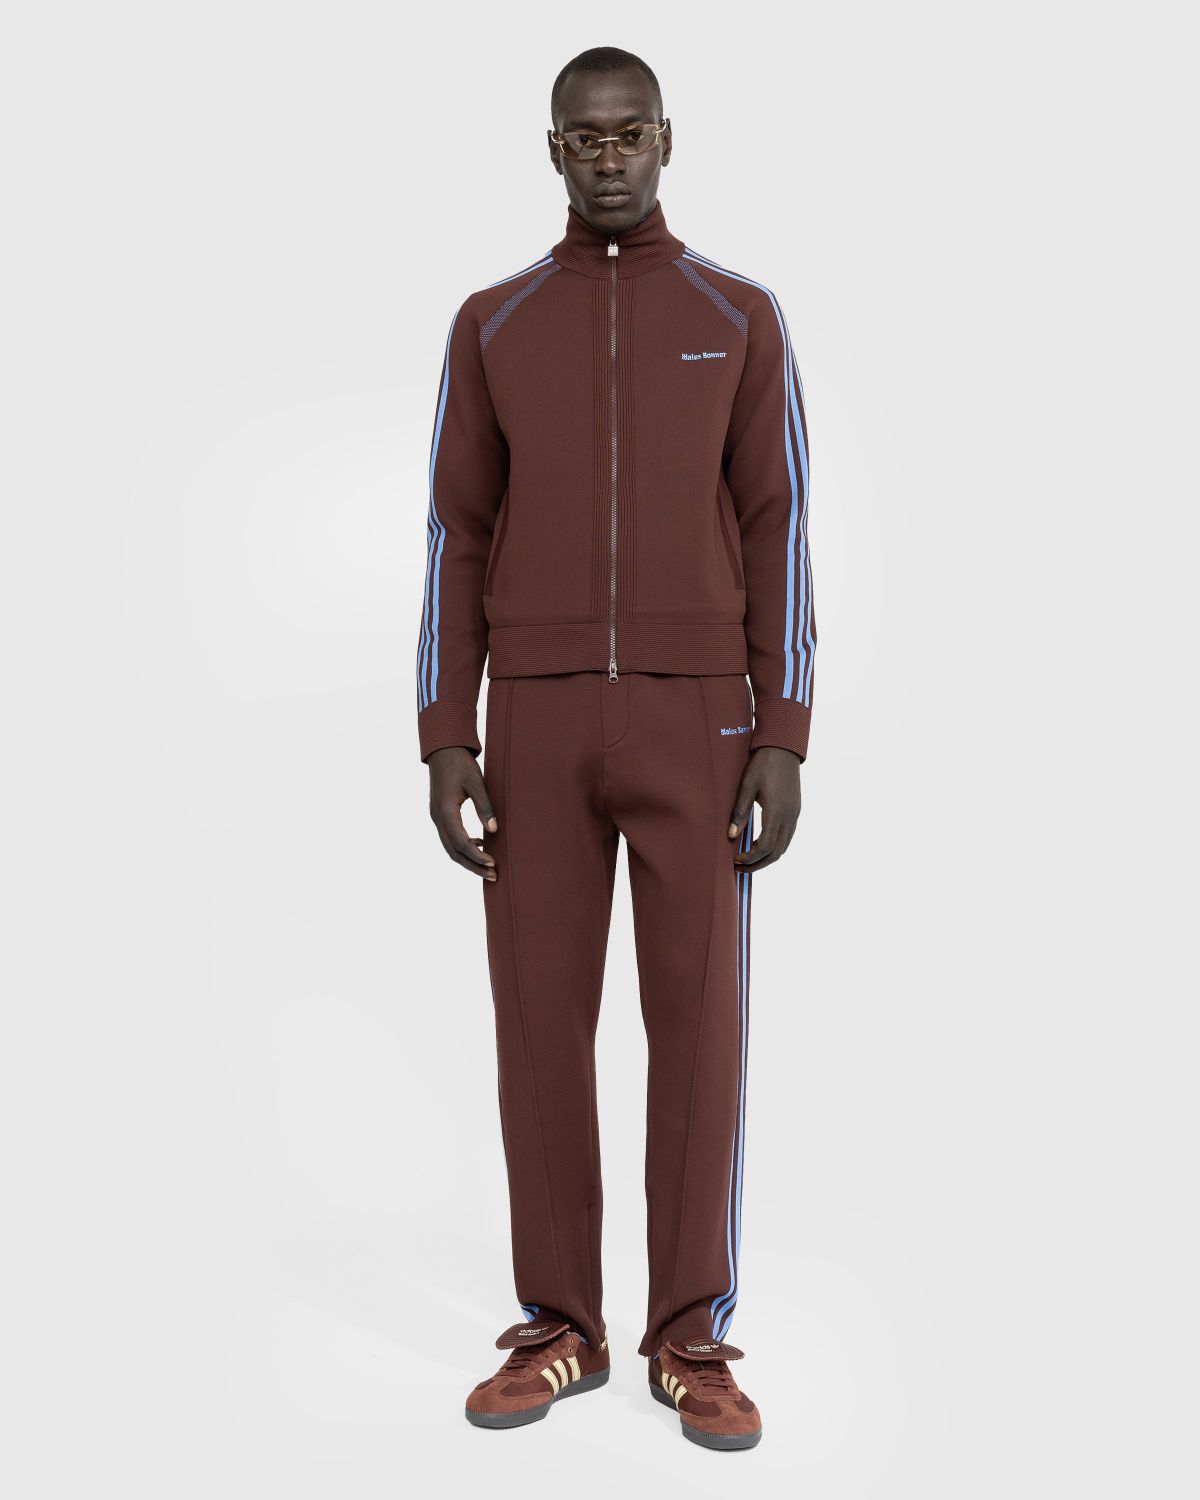 Adidas x Wales Bonner – Knit Track Top Mystery Brown